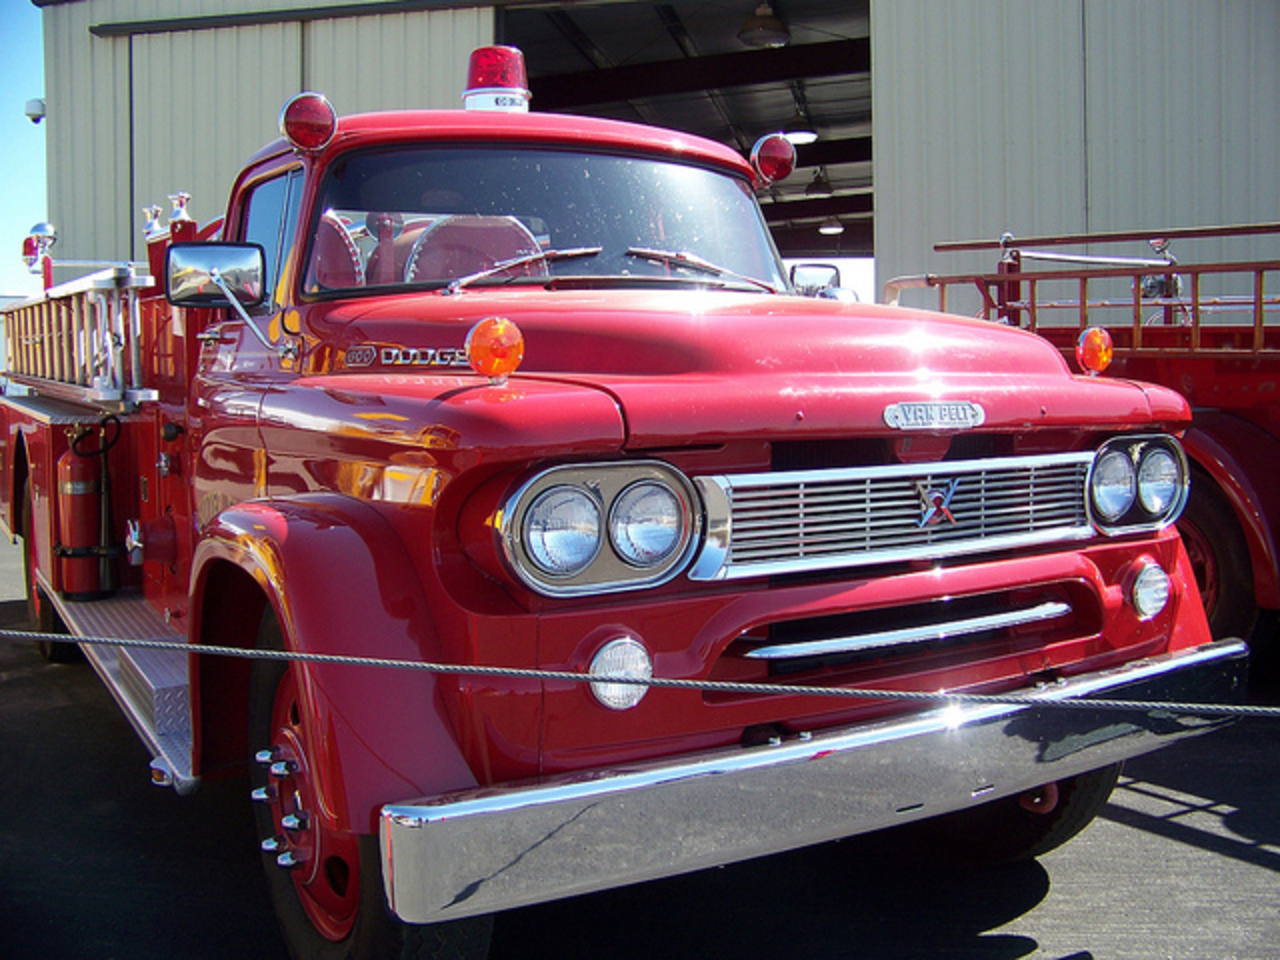 Flickr: The Dodge Fire Trucks - Rescue - Chiefs Pool